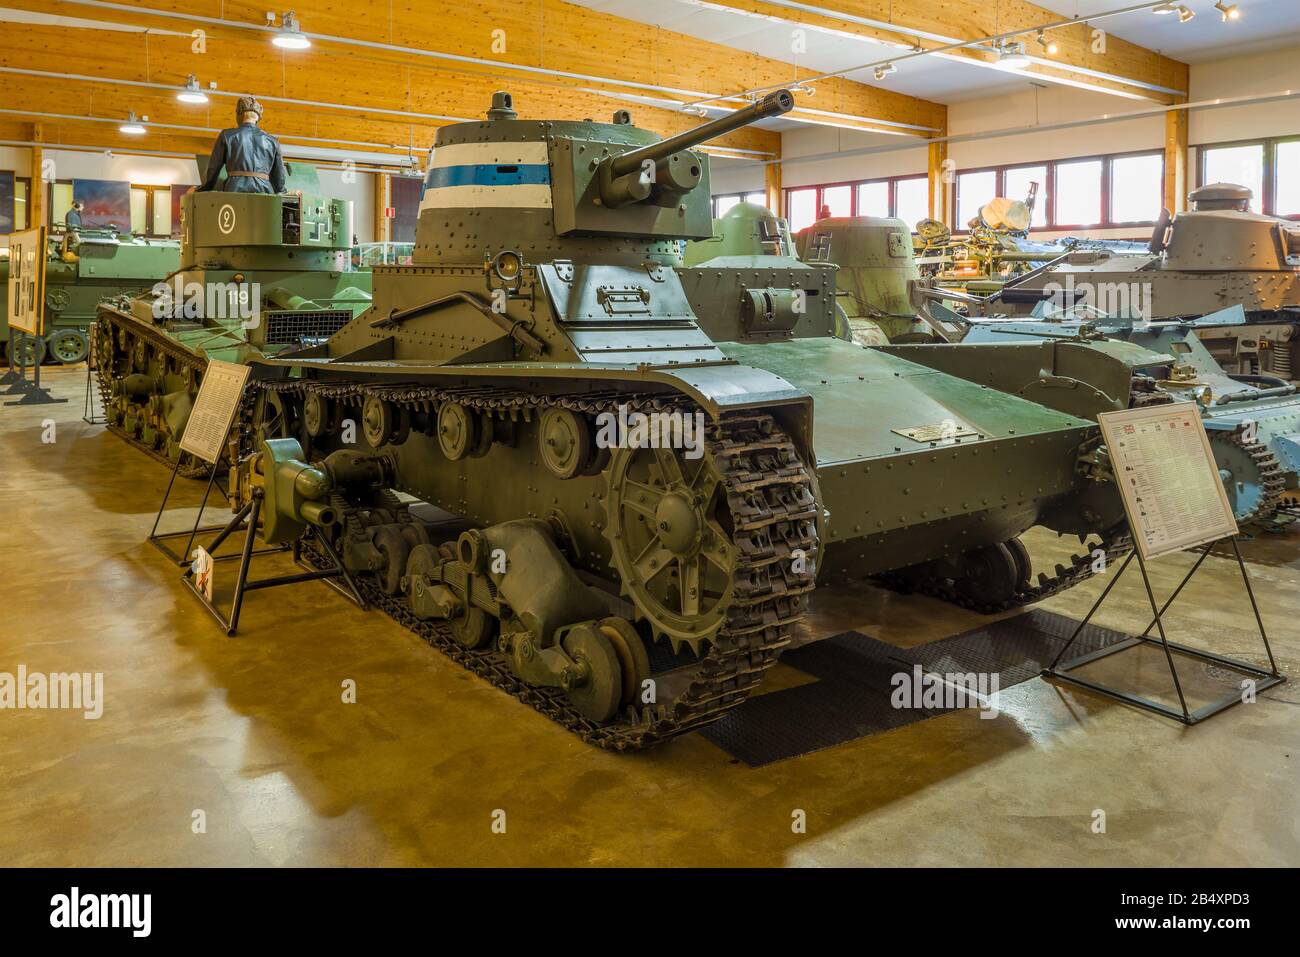 PAROLA, FINLAND - JUNE 10, 2017: Vickers Mk E (Vickers-Amstrong 6 ton tank) in the museum of armored vehicles of the city of Parola Stock Photo